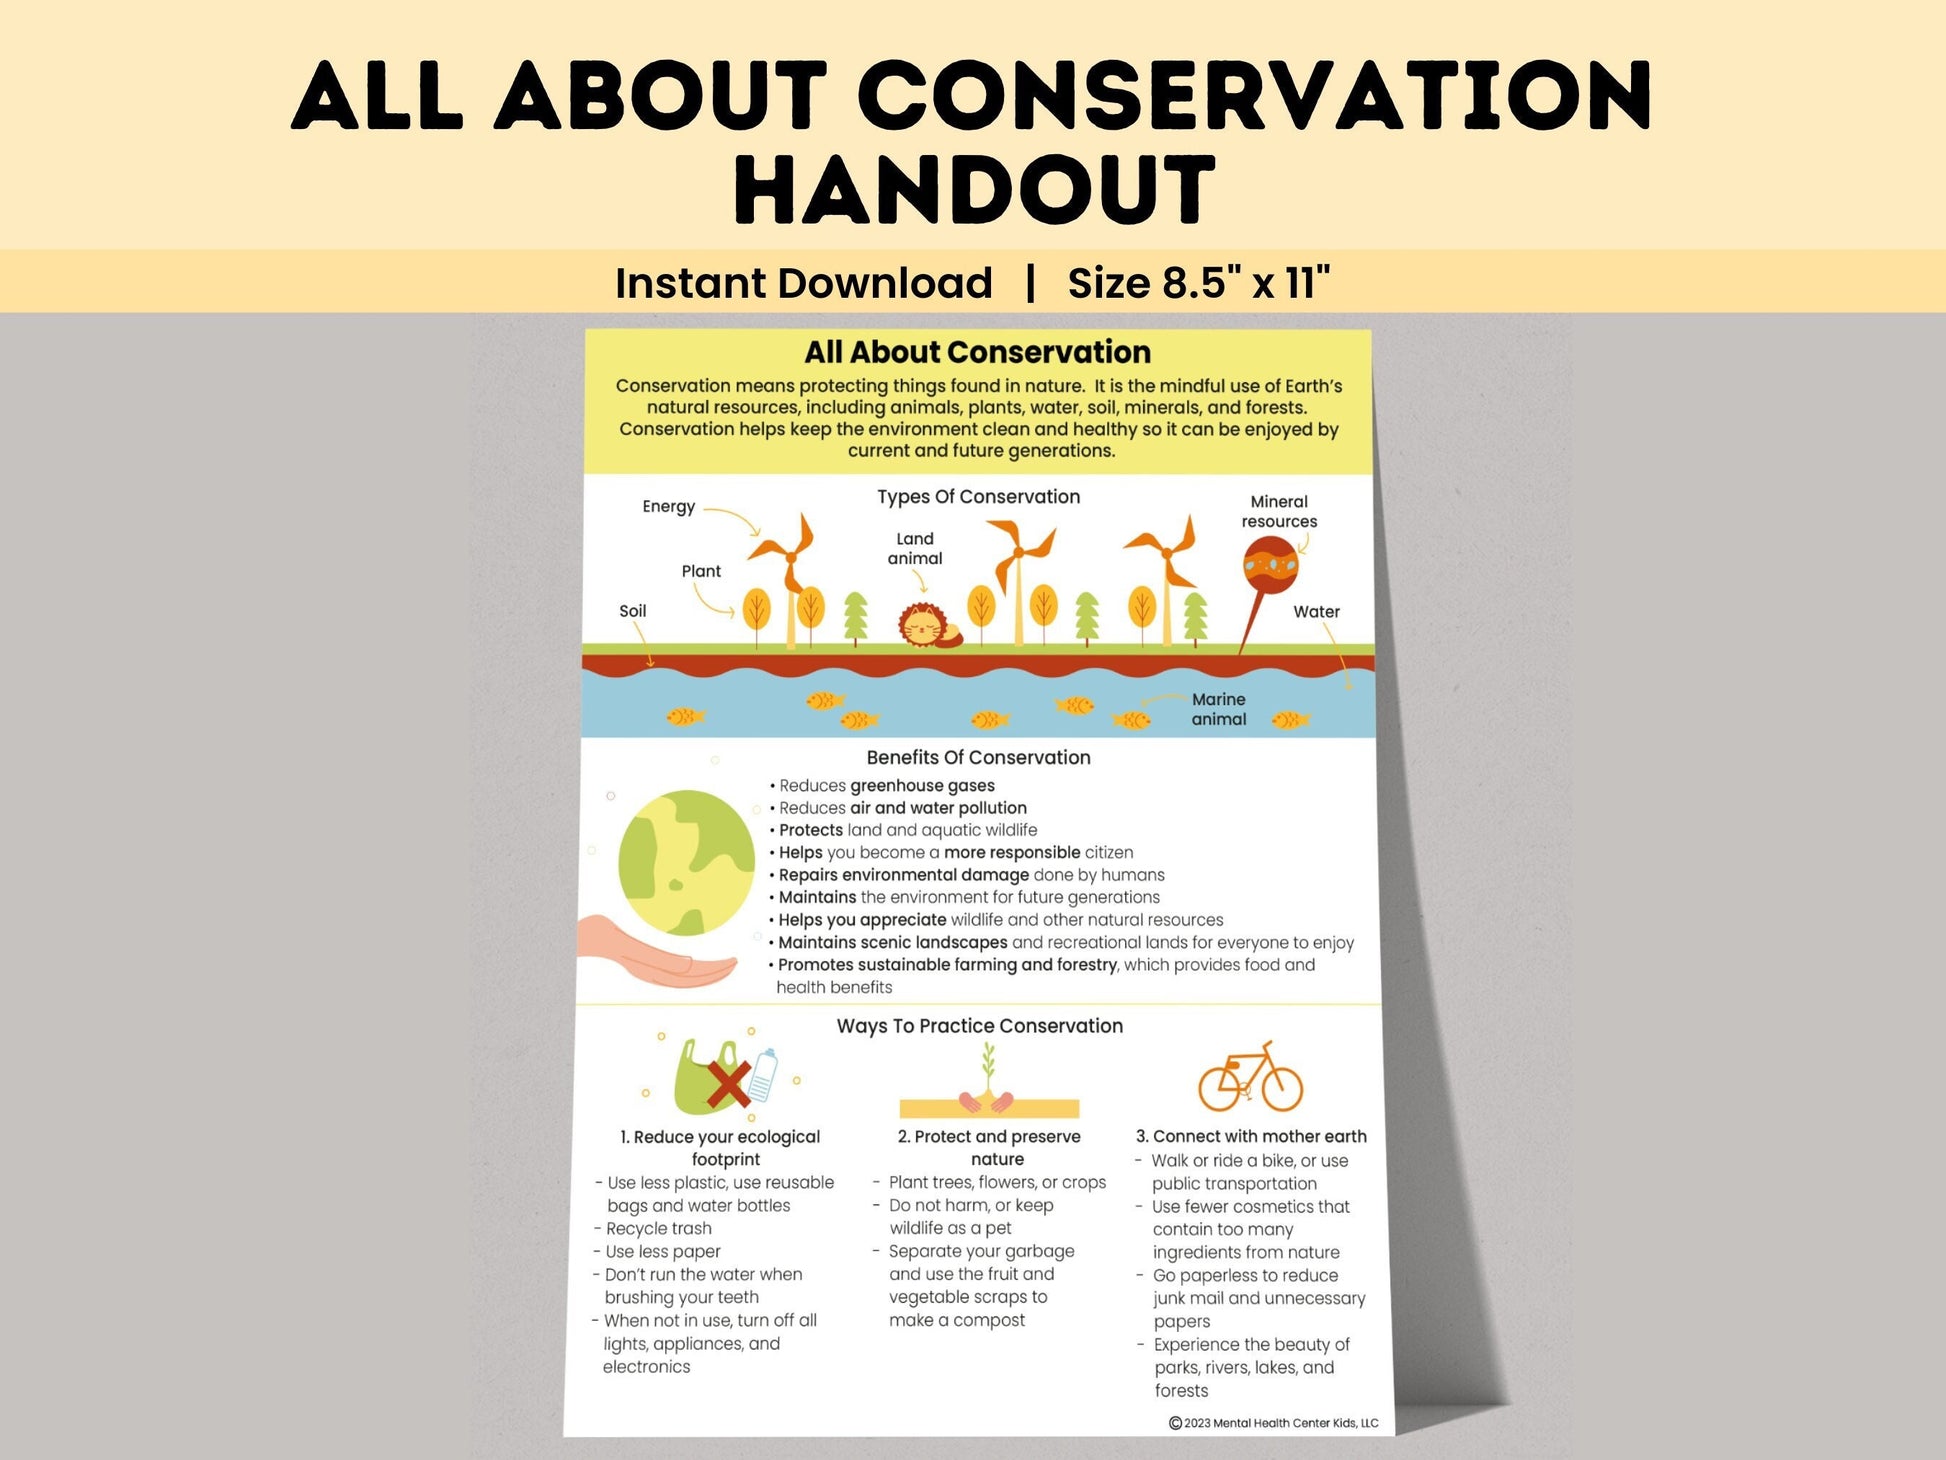 All About Conservation